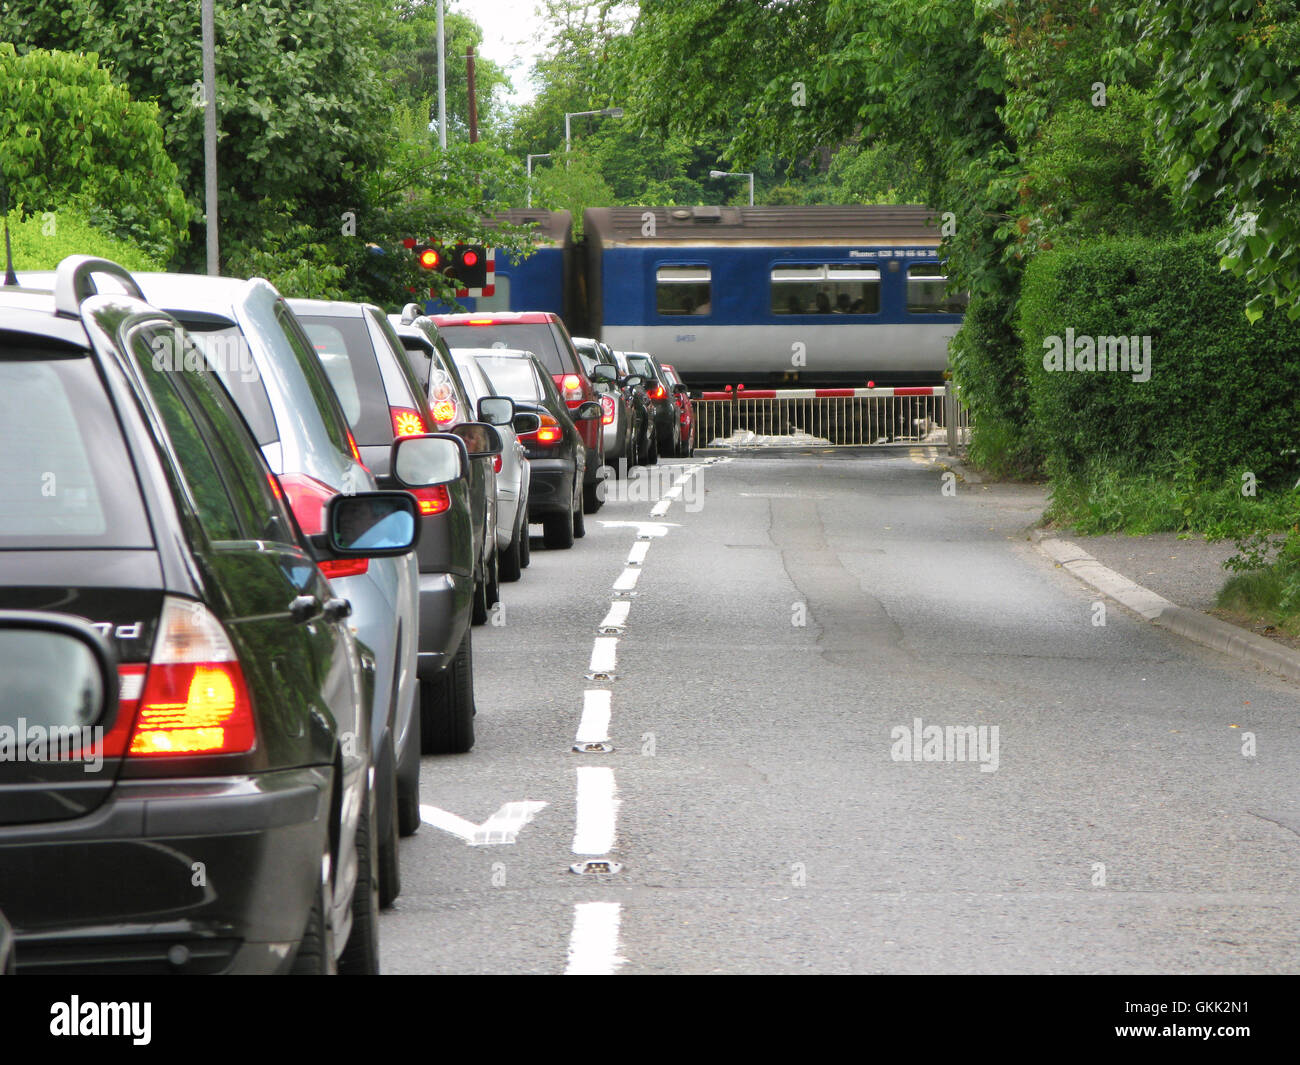 row of cars waiting at rural level crossing at jordanstown northern ireland Stock Photo